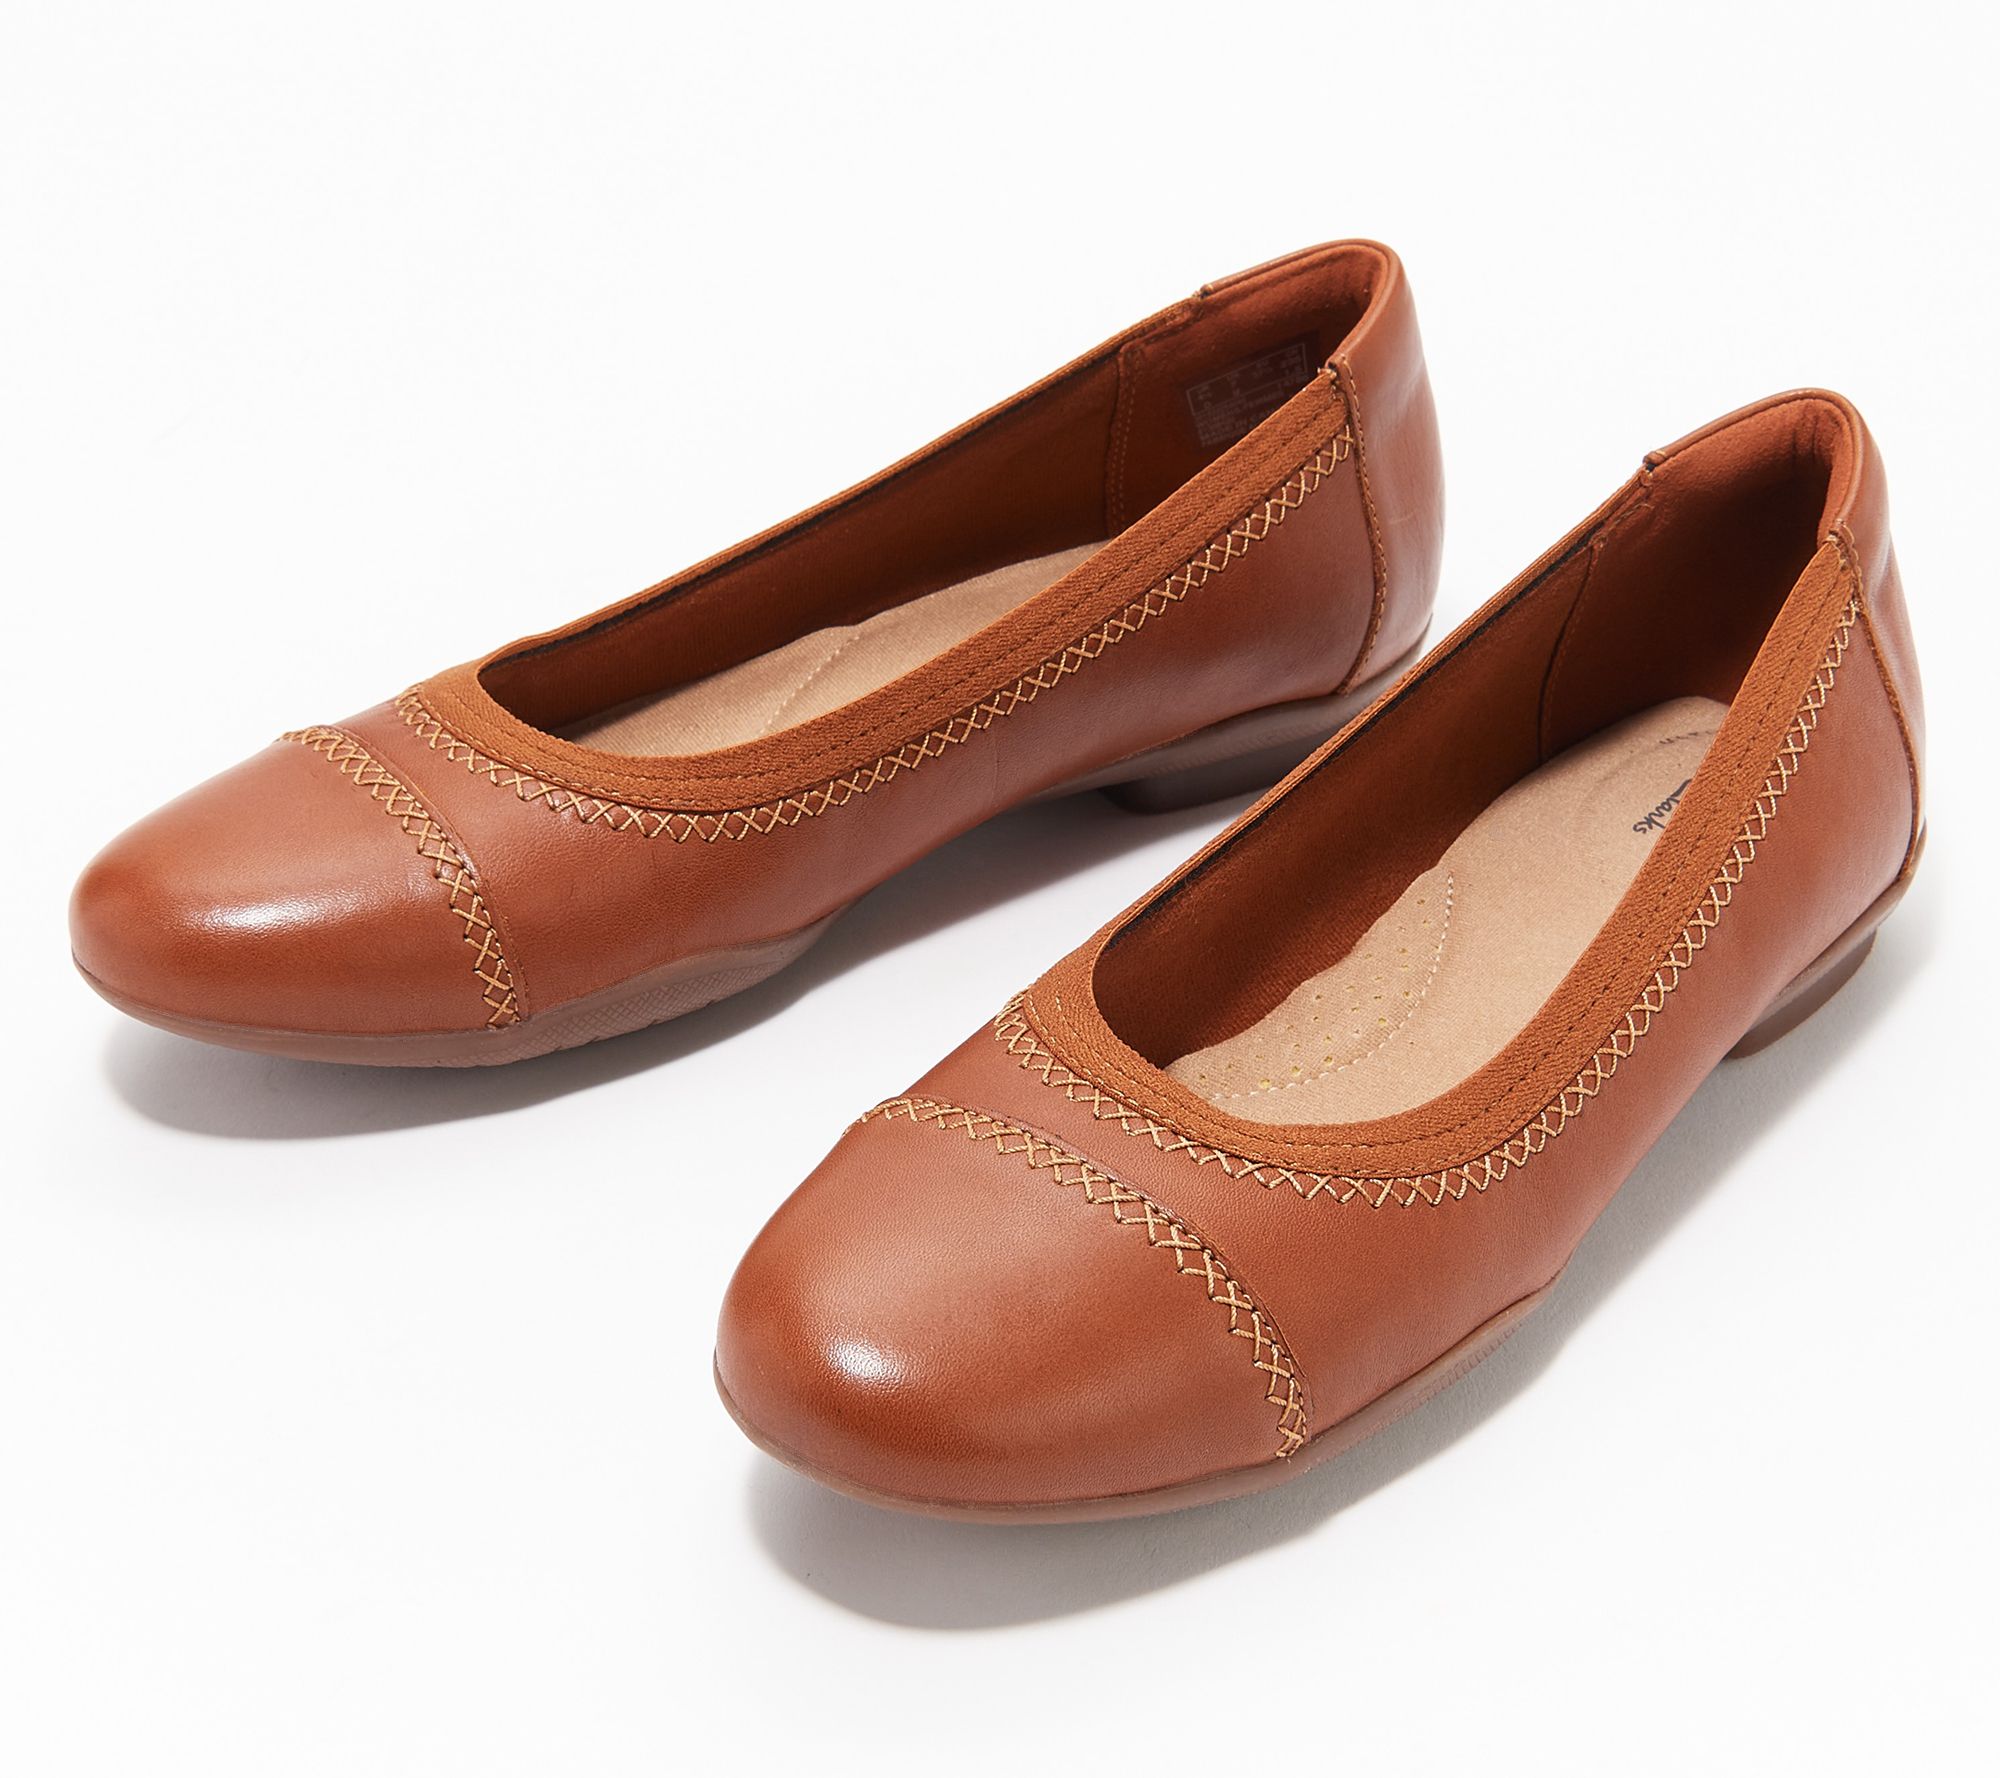 As Is" Clarks Collection Leather Ballet Flats - Bay - QVC.com